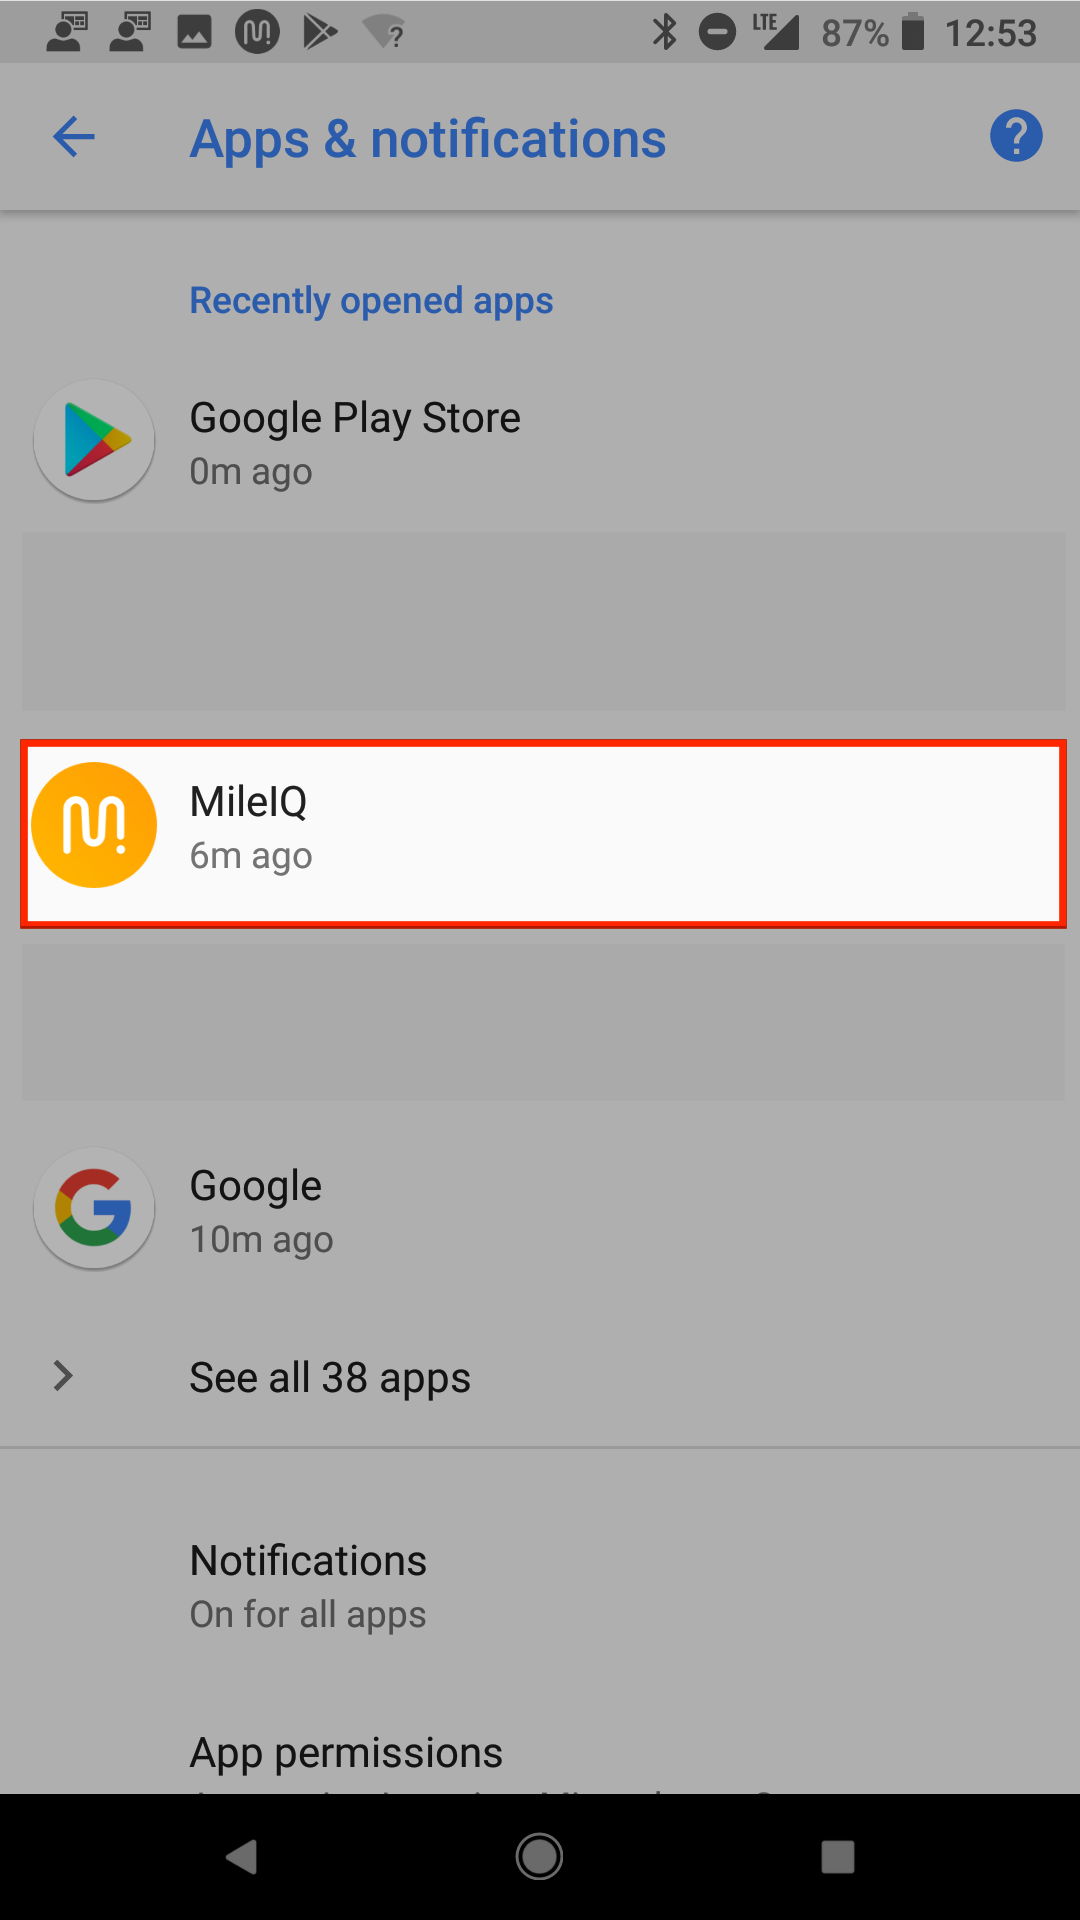 This image shows the MileIQ app within the Apps & Notifications page.